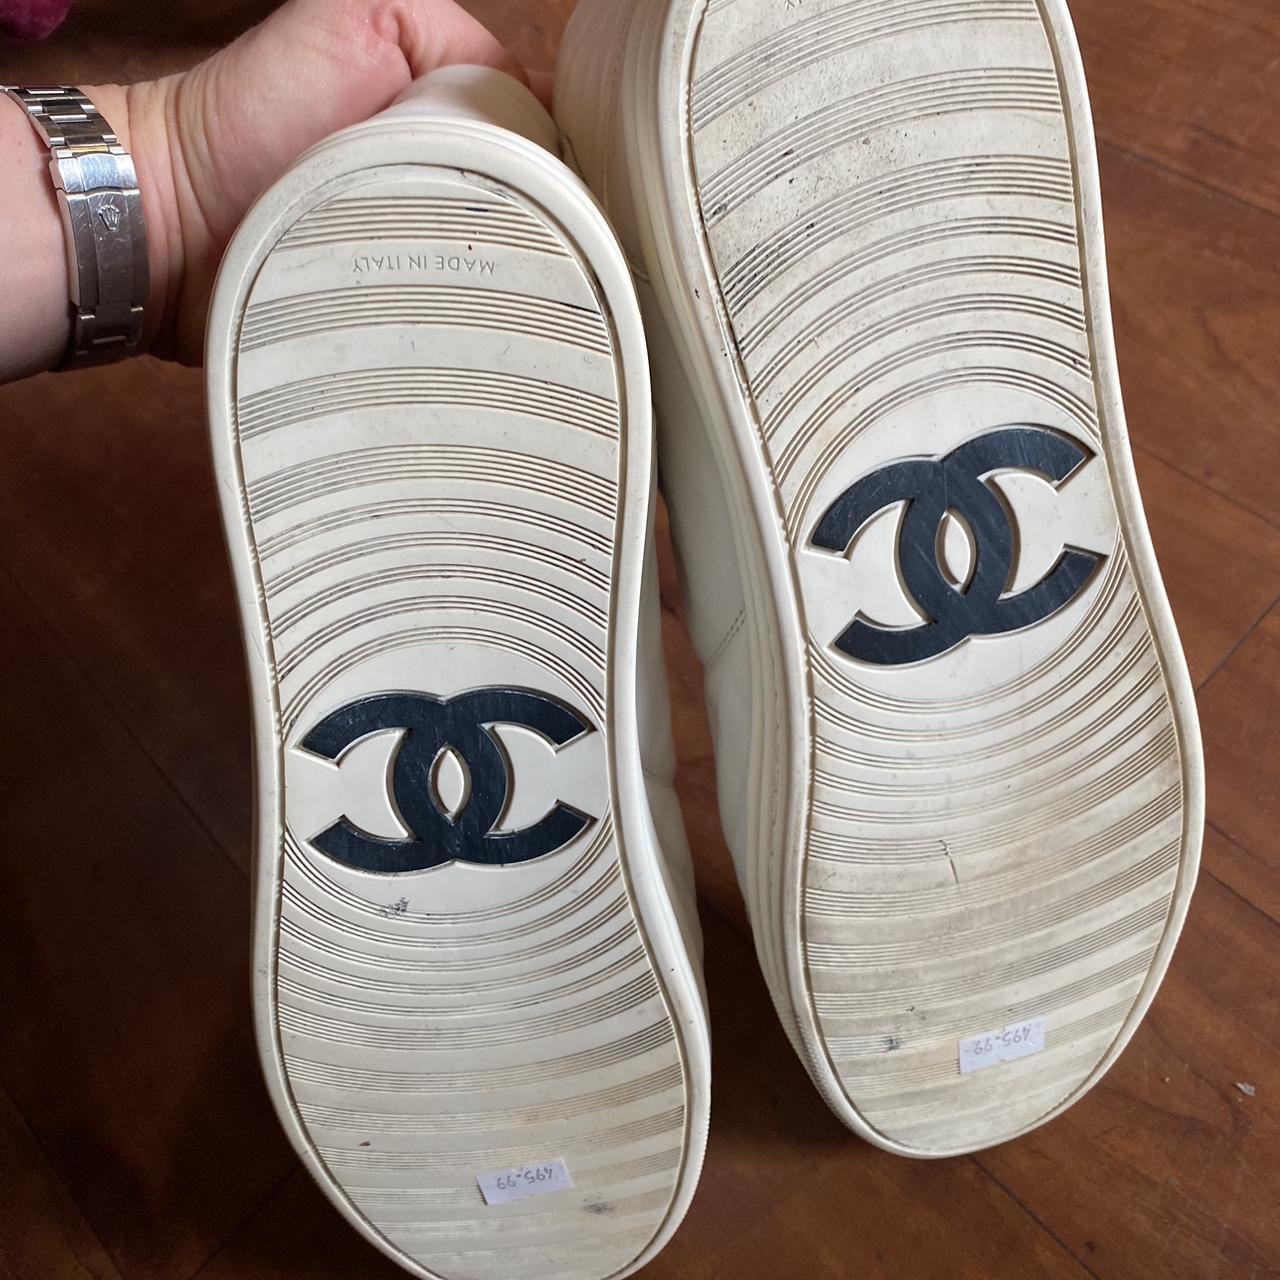 Chanel Espadrilles , Black and nude pair, Size 5, Worn